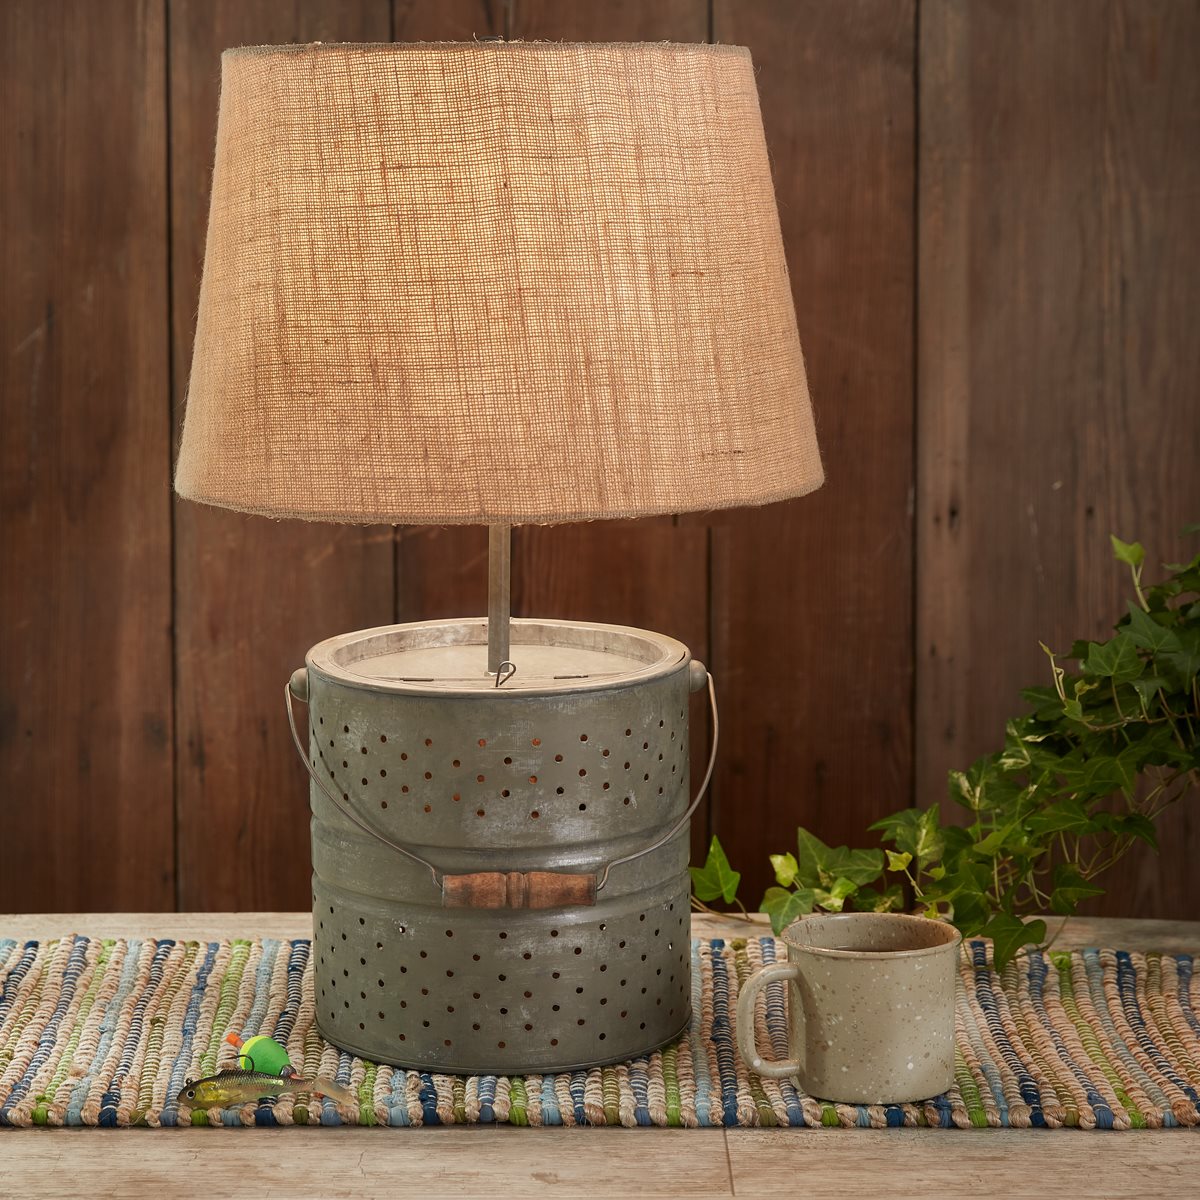 Bait Bucket Lamp with Shade